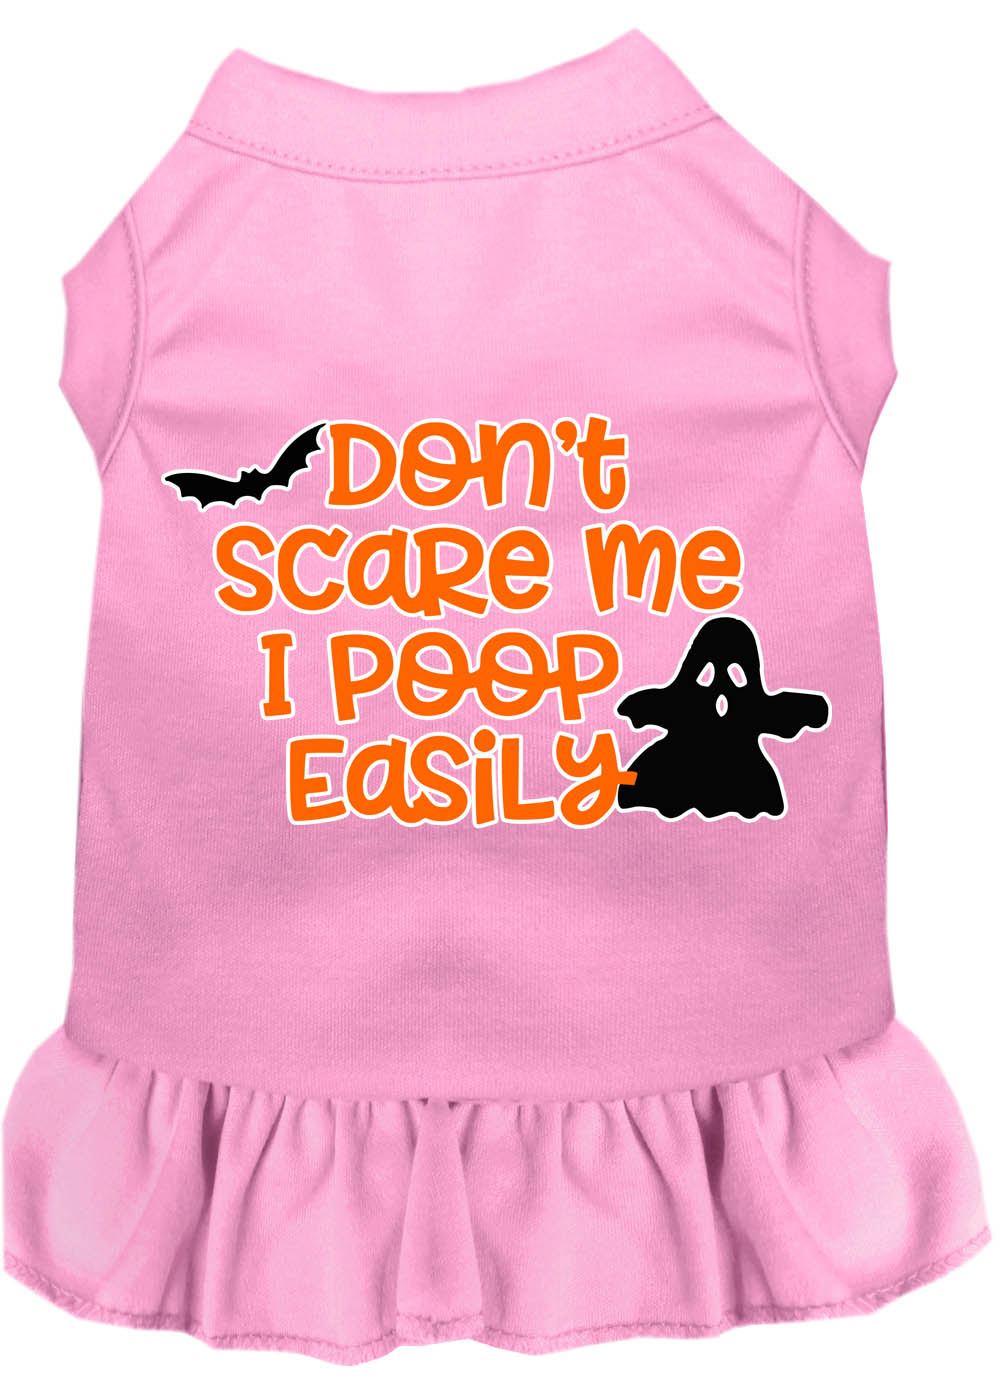 Don't Scare Me, Poops Easily Screen Print Dog Dress Light Pink Lg